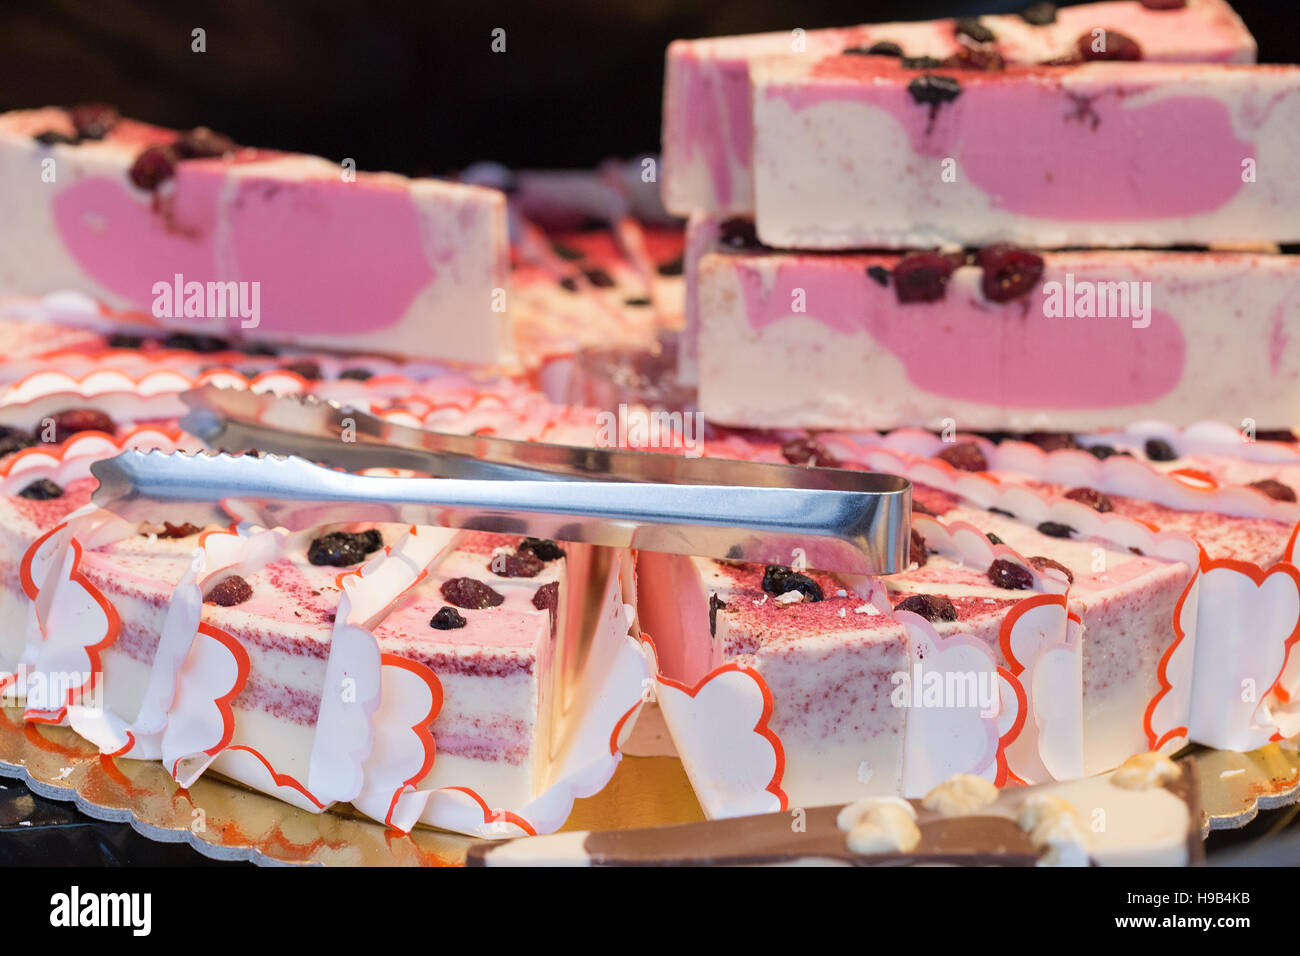 Close up artisan farmers market display of pink cherry berry cream cheese cake piled high with tongs Stock Photo